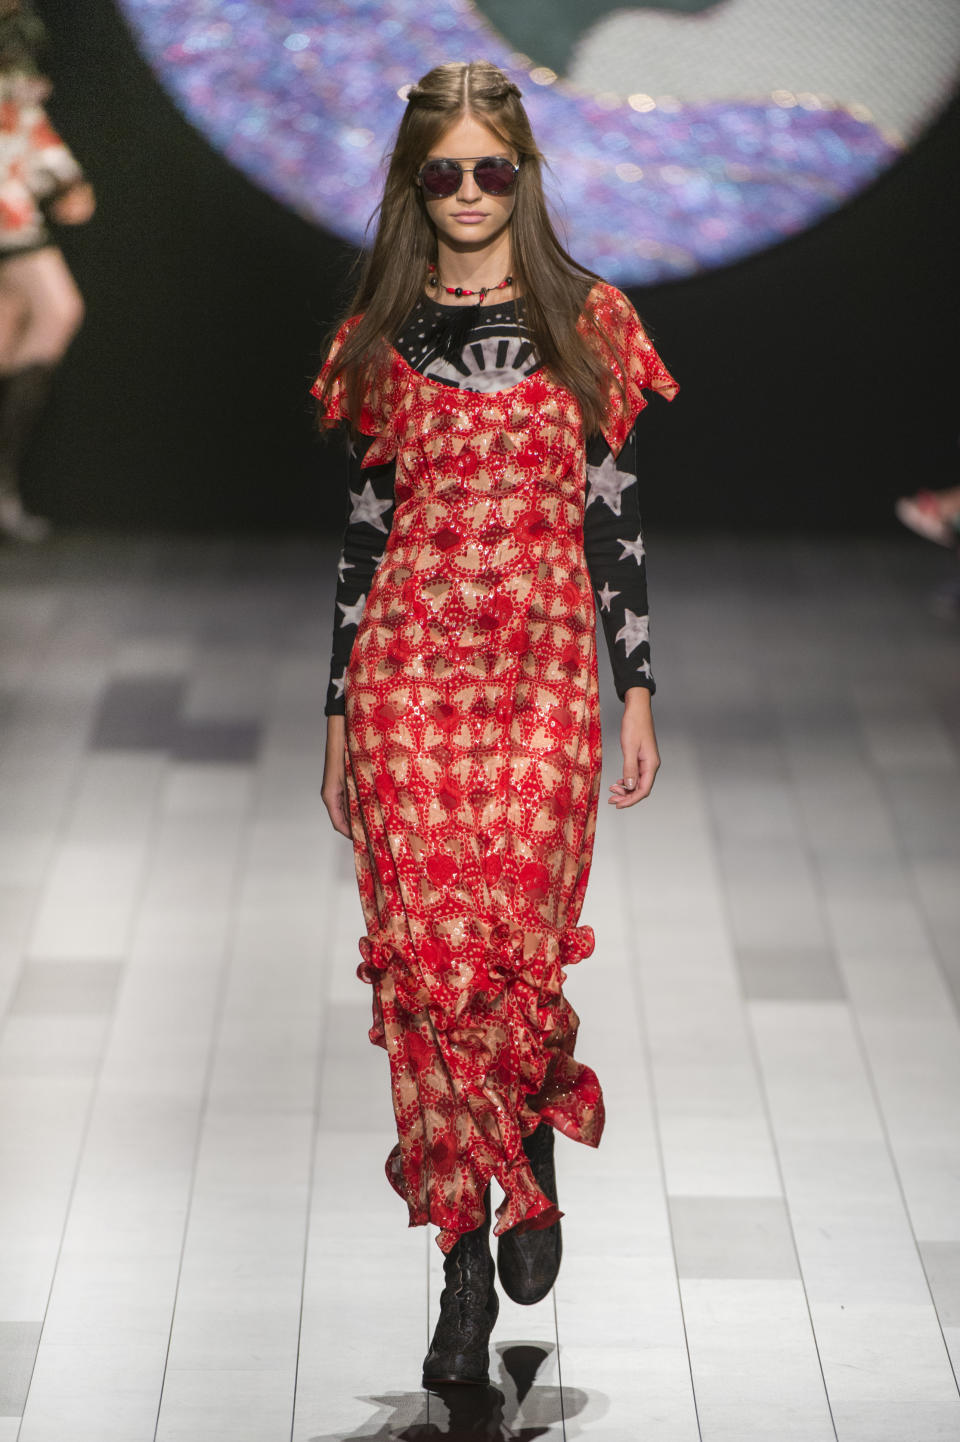 <p><i>Model wears a star-printed top under a sparkly red frilly dress from the SS18 Anna Sui collection. (Photo: ImaxTree) </i></p>